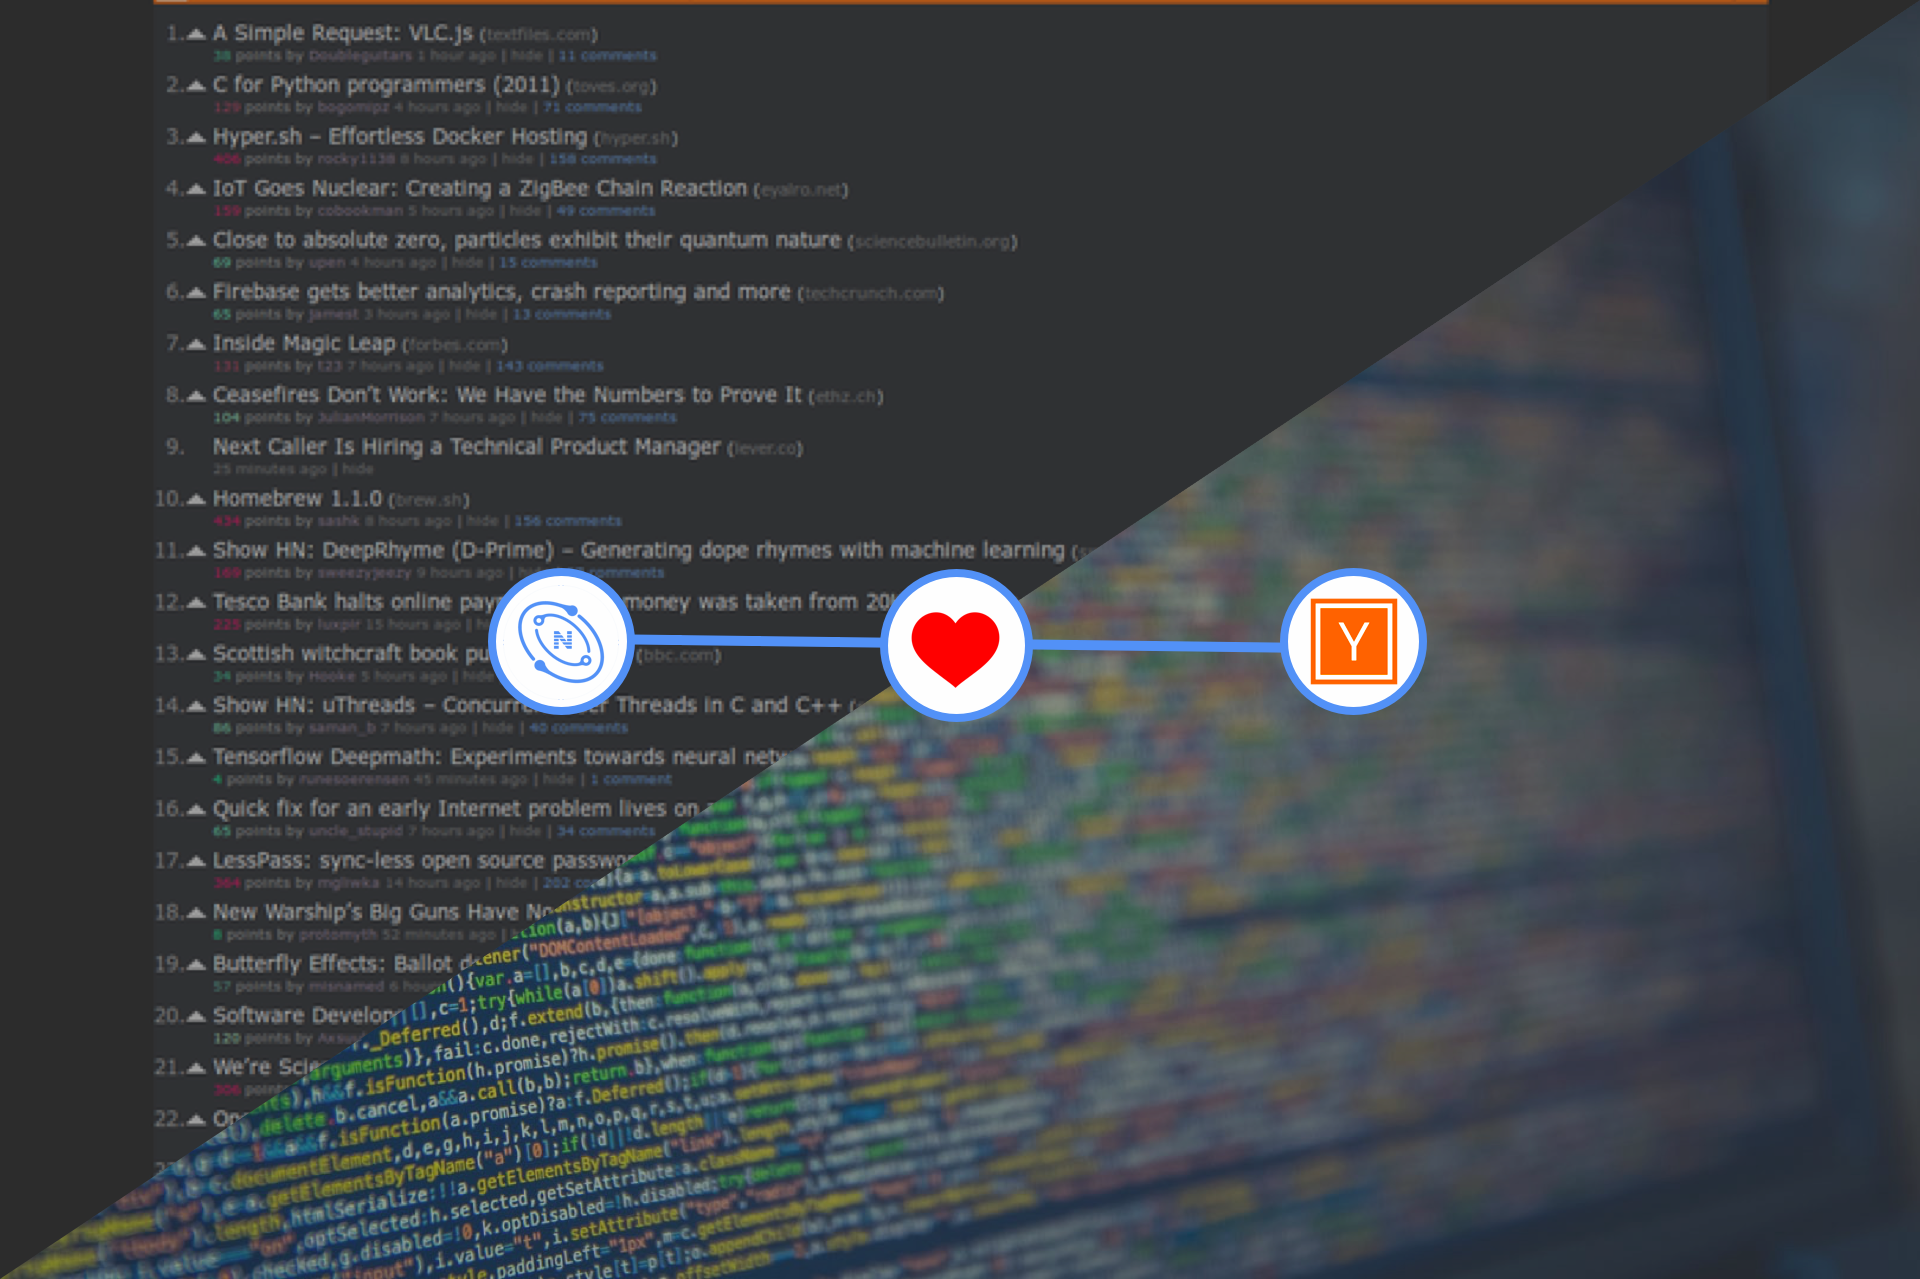 Hacker News: A Community, Forum, and Website for Technology and Startups